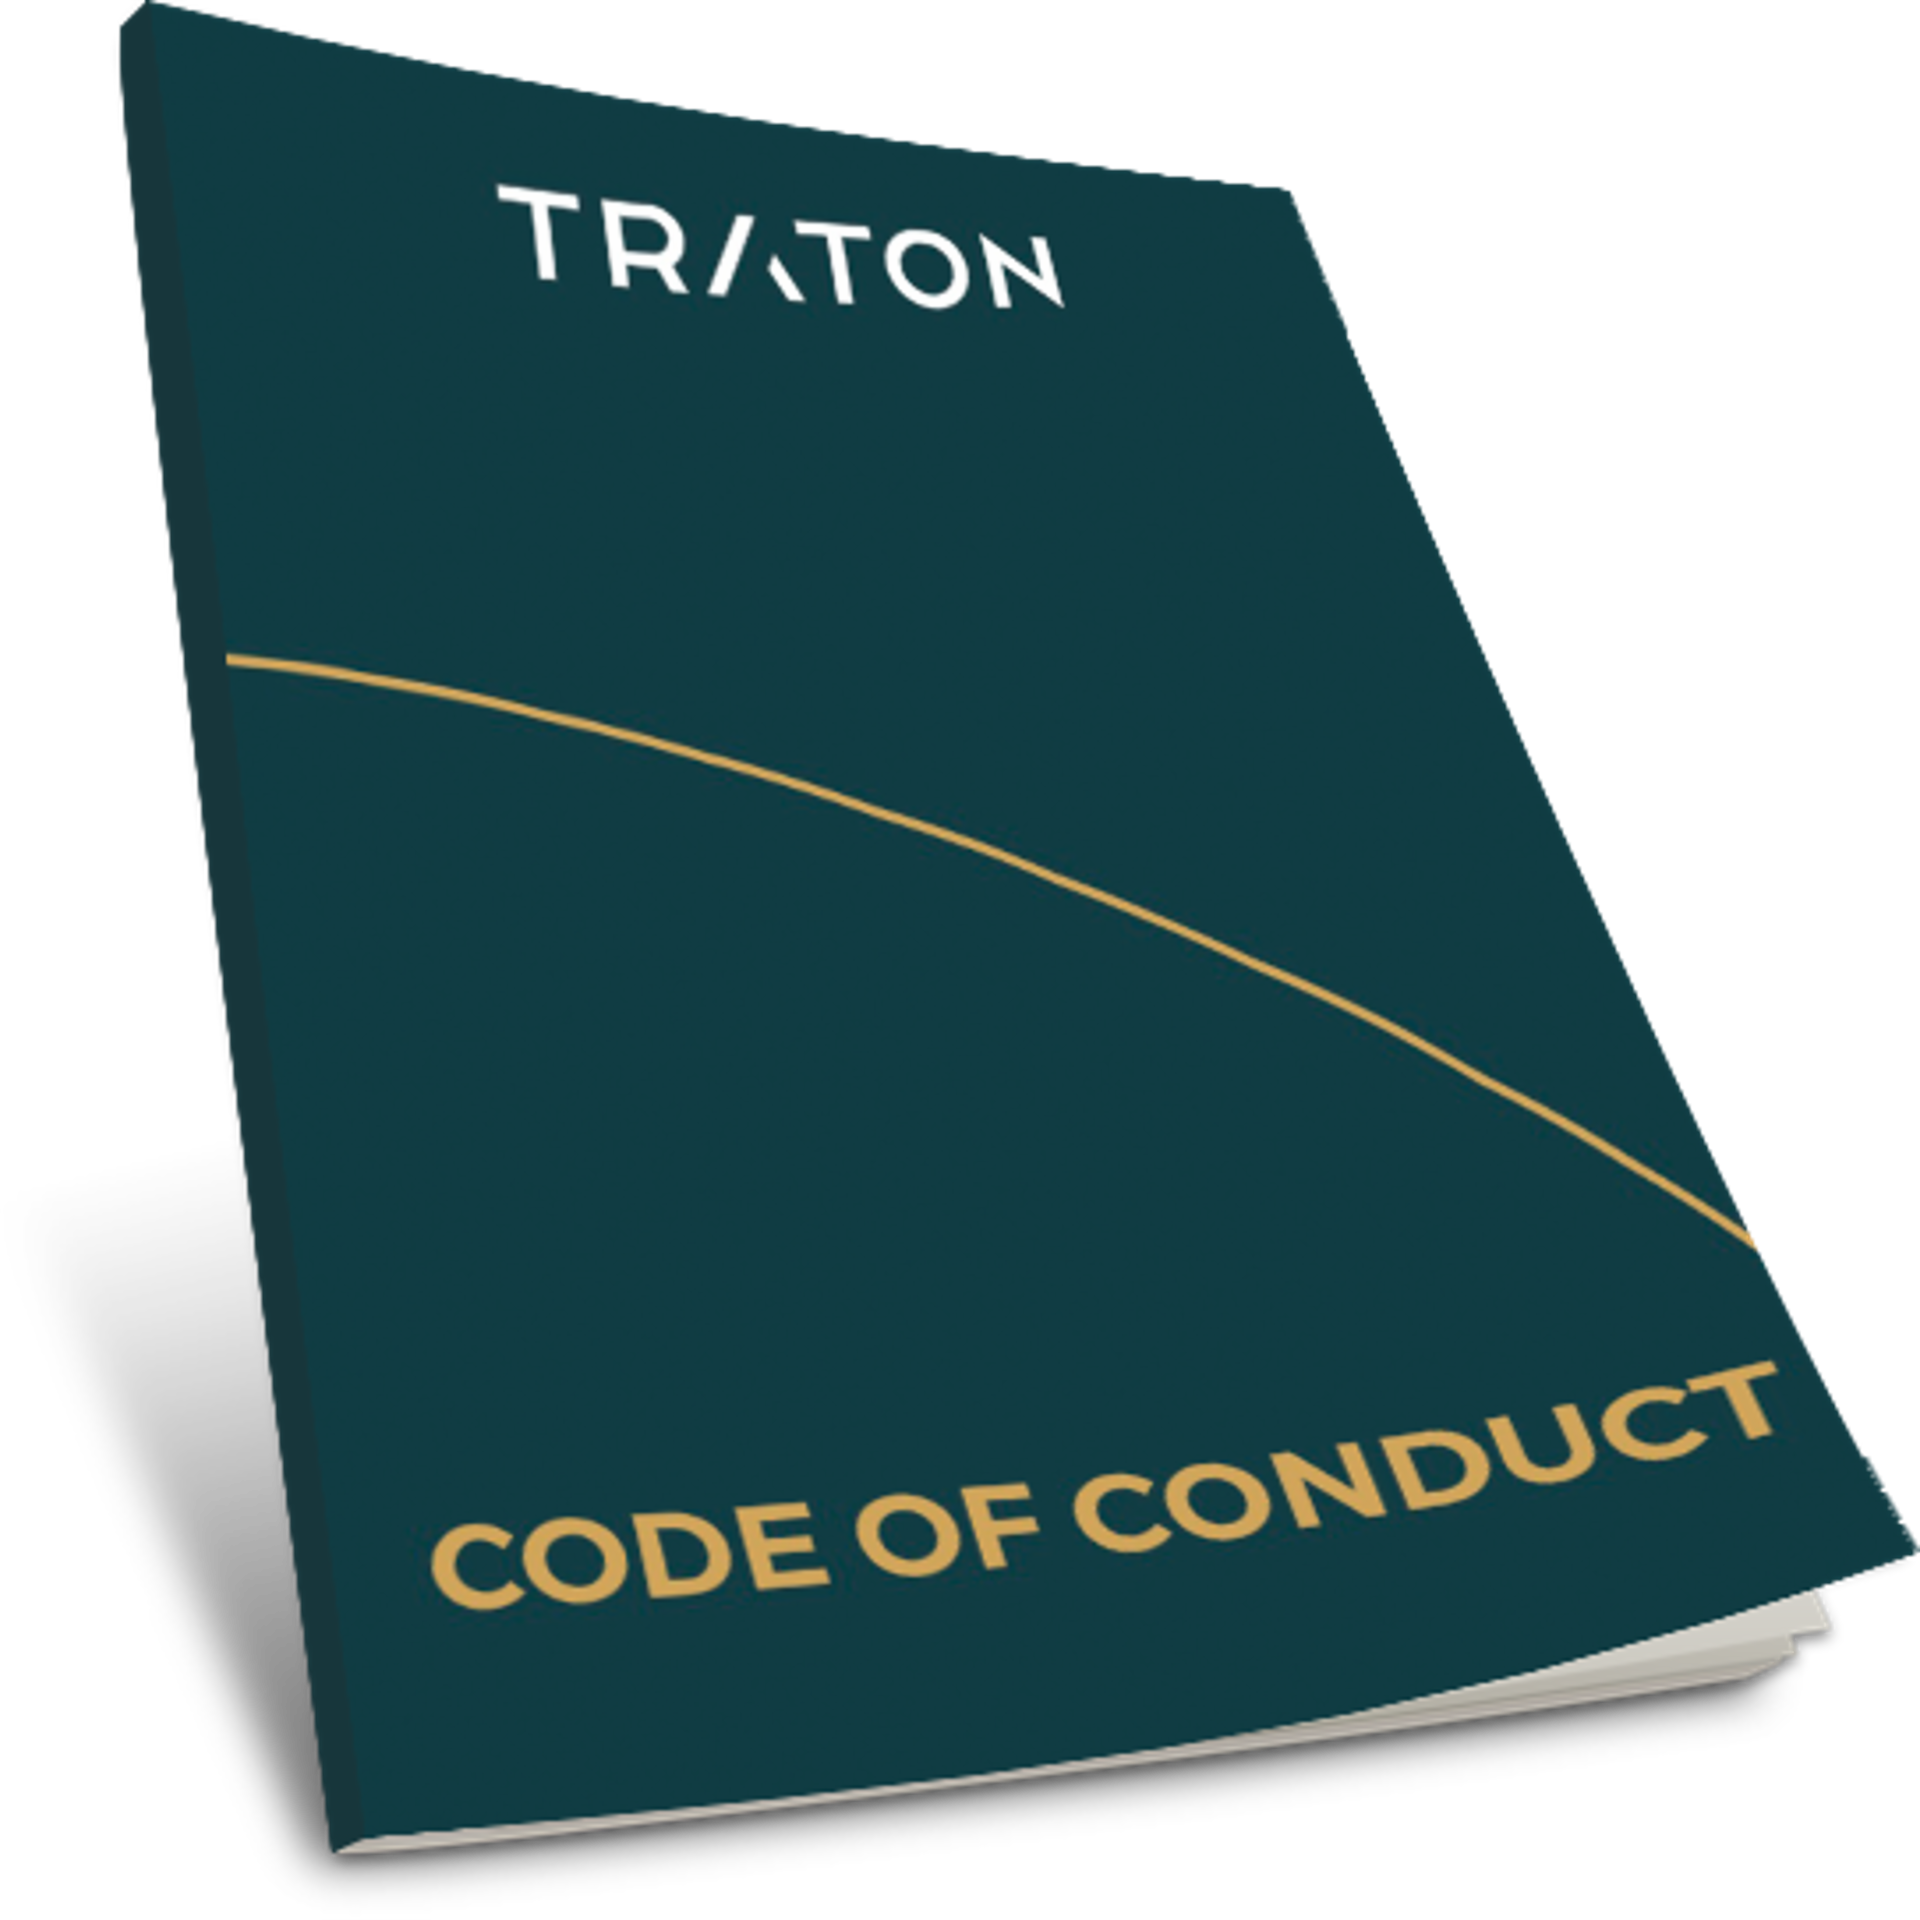 Cover sheet TRATON Code of Conduct in dark turquoise with a yellow line that runs diagonally across the cover sheet